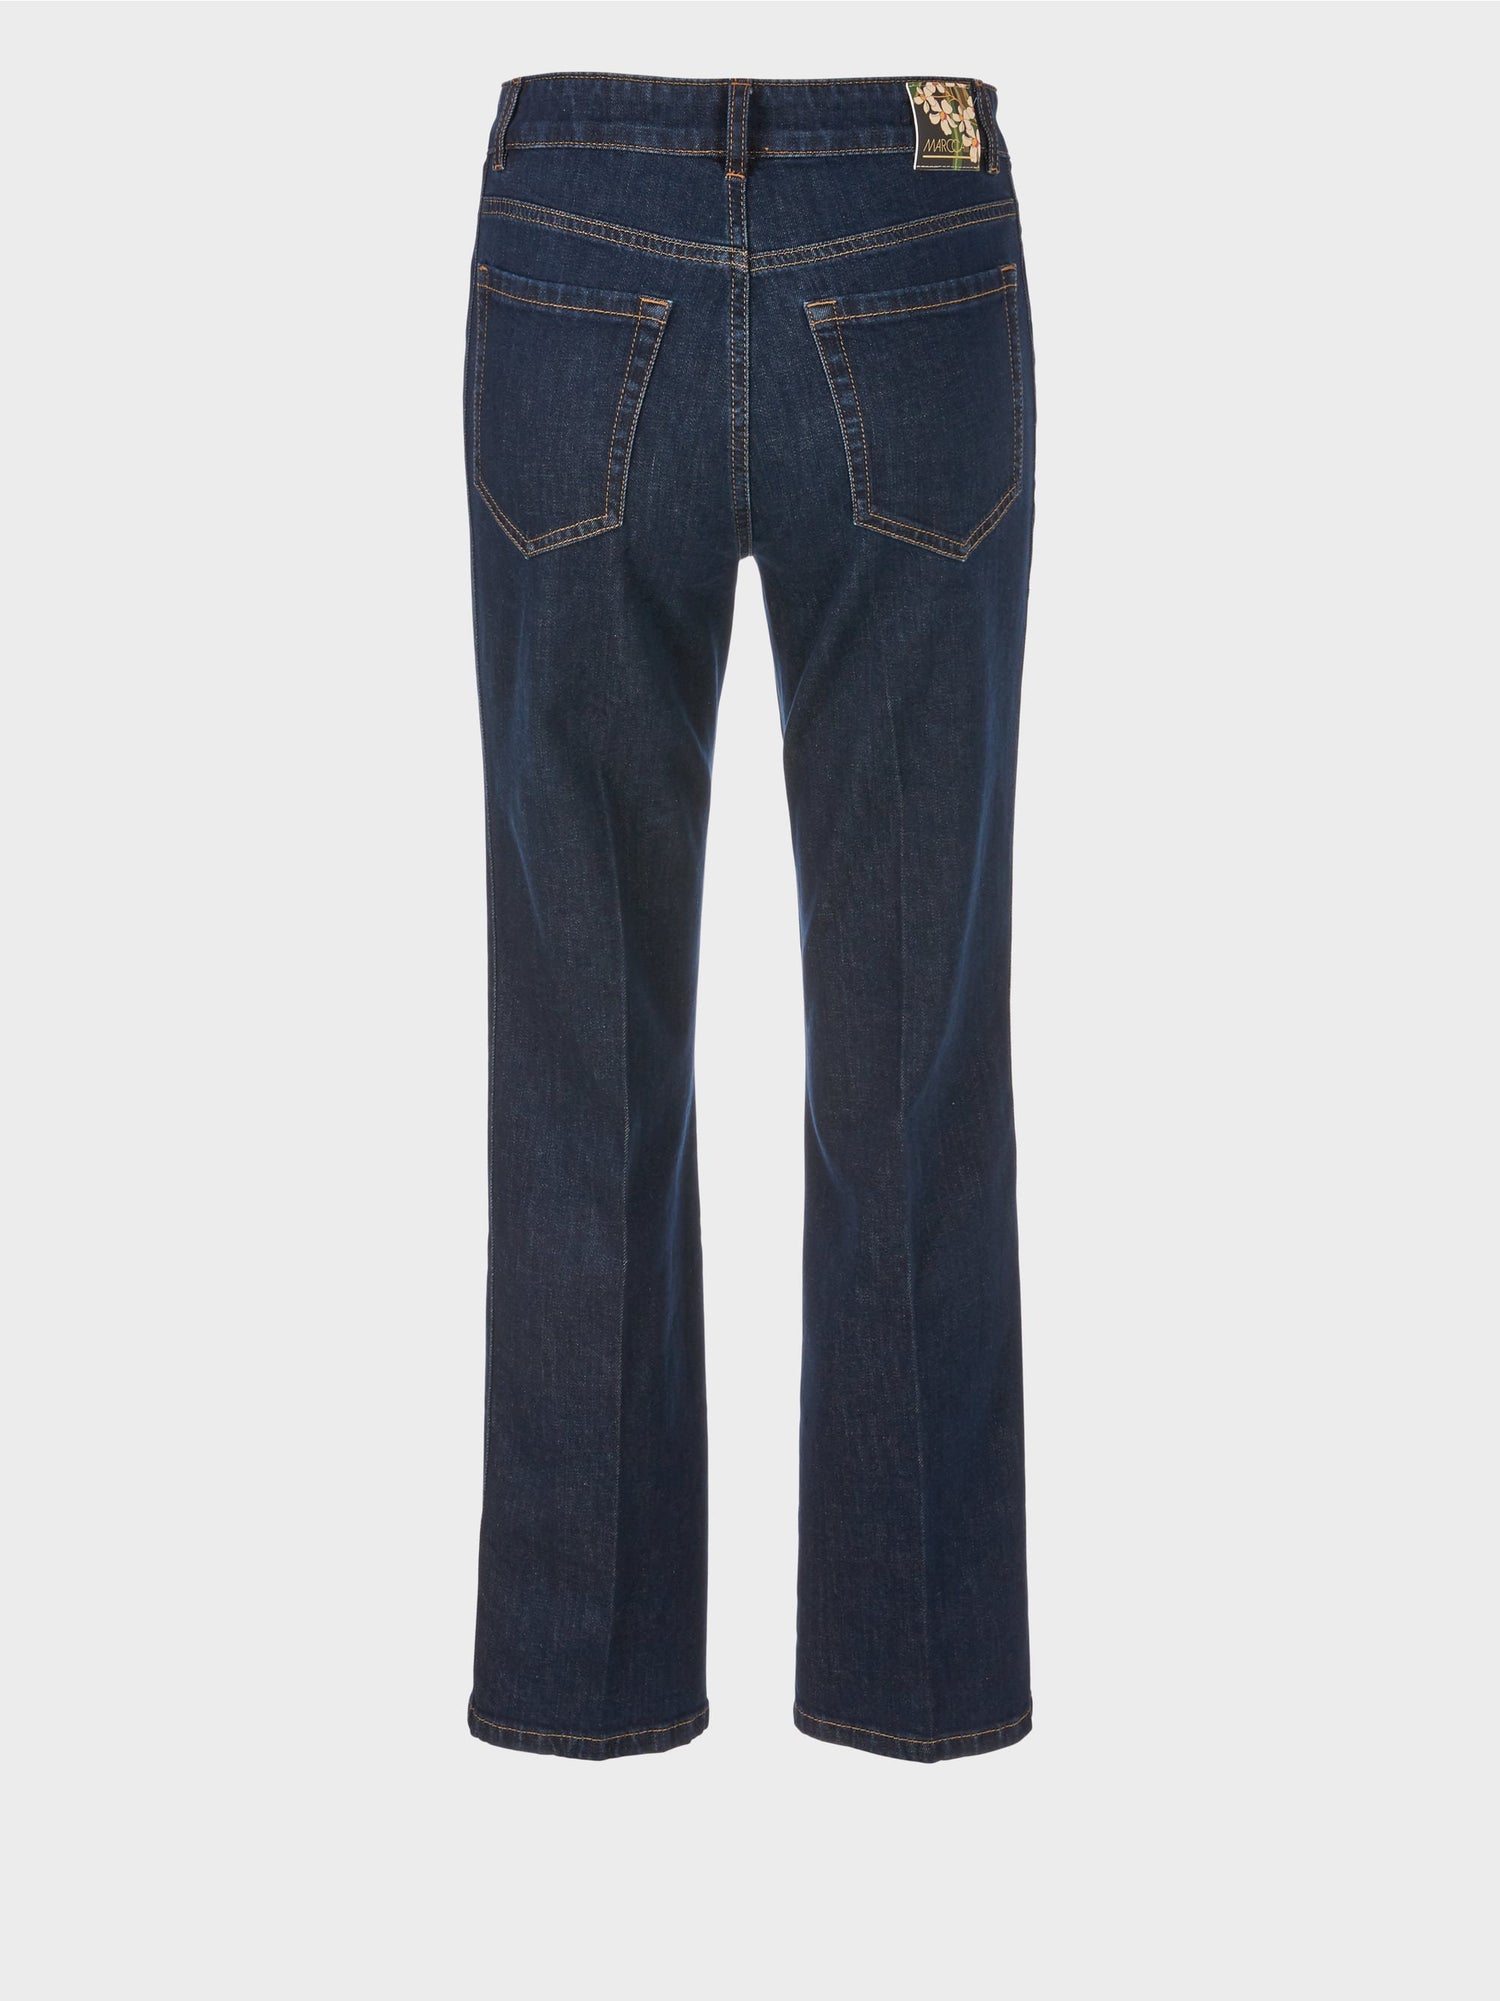 Faro &quot;Rethink Together&quot; Jeans_VC 82.16 D52_357_06